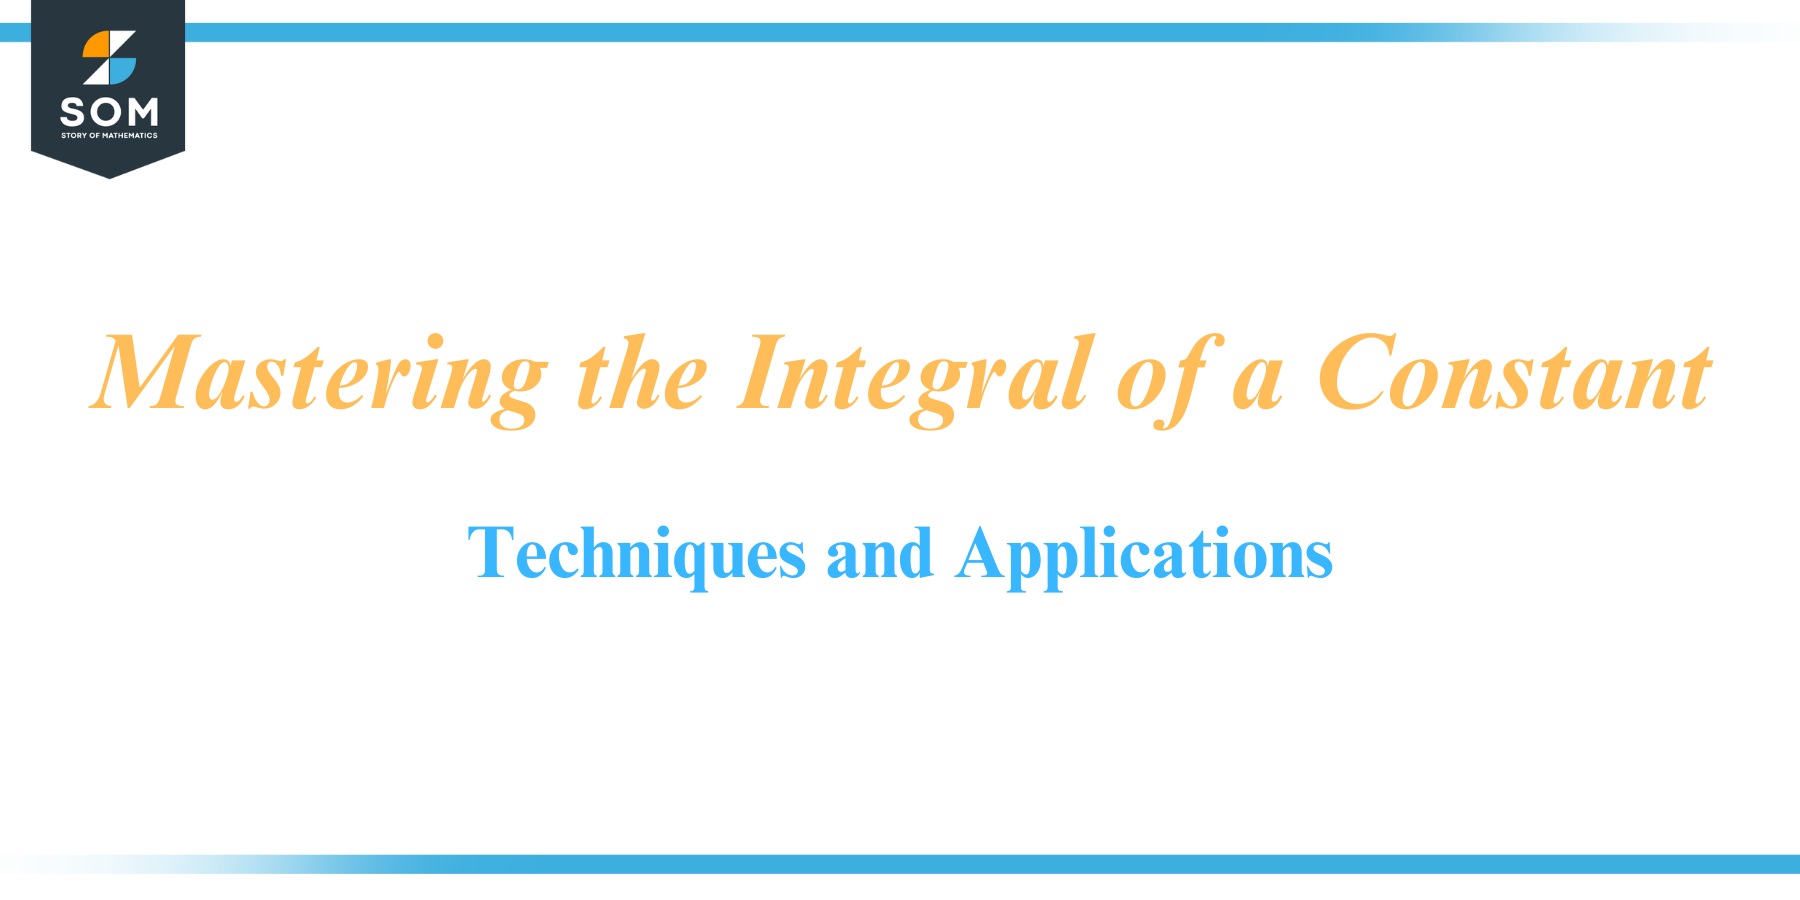 Mastering the Integral of a Constant Techniques and Applications